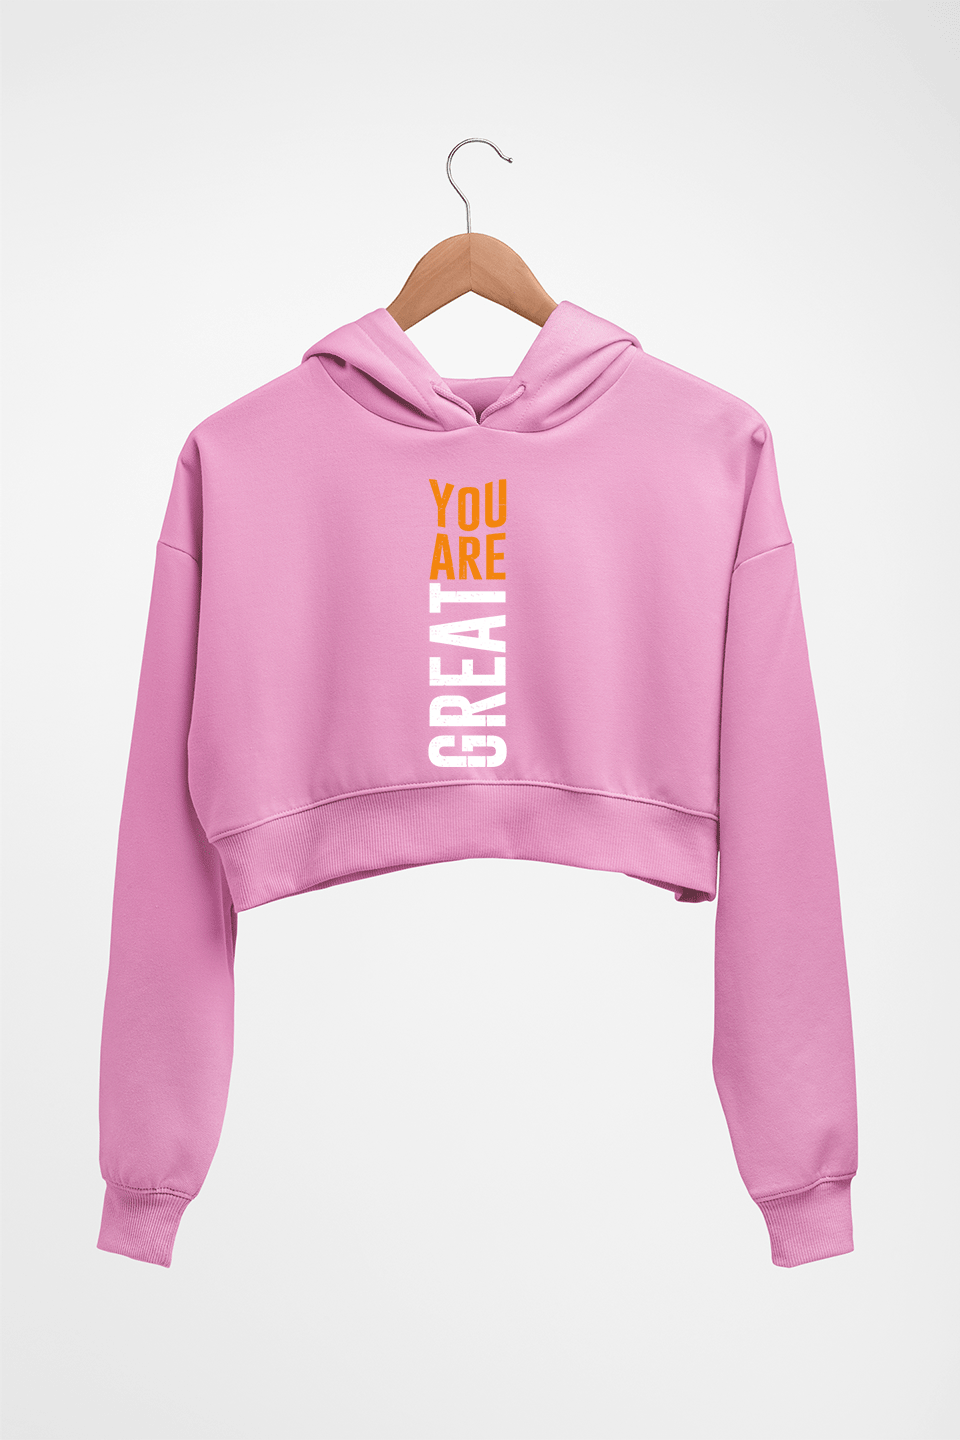 You Are Great Crop HOODIE FOR WOMEN